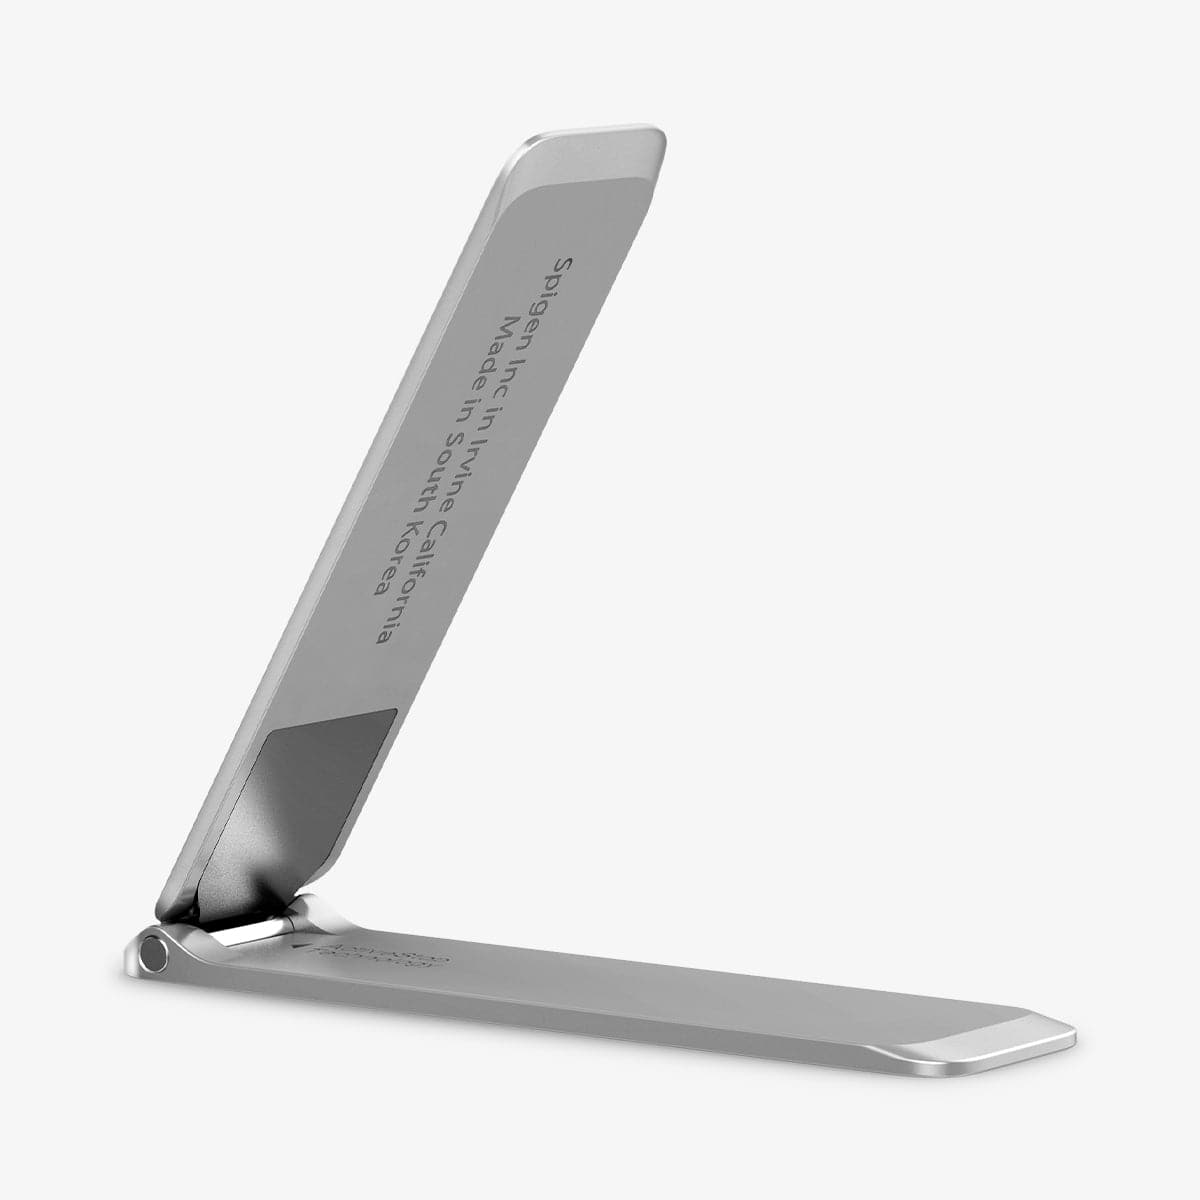 AMP03030 - U101 Universal Kickstand (Metal) in silver showing the kickstand extended out